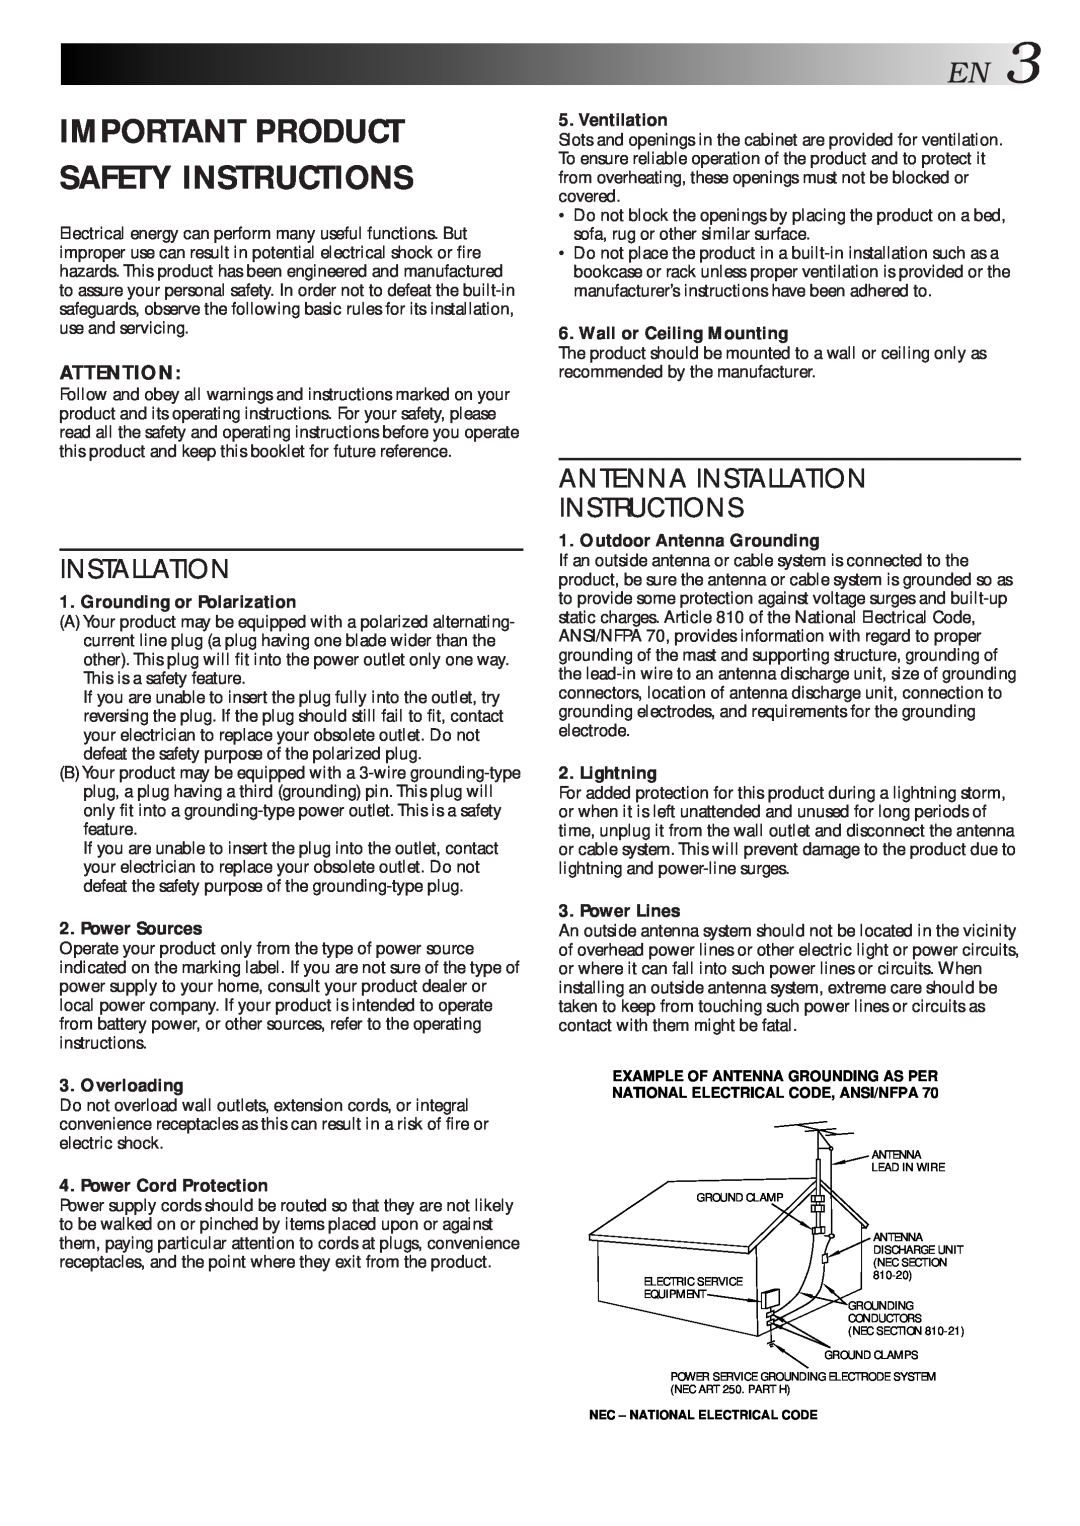 JVC HR-S7500U manual Important Product Safety Instructions, Antenna Installation Instructions 